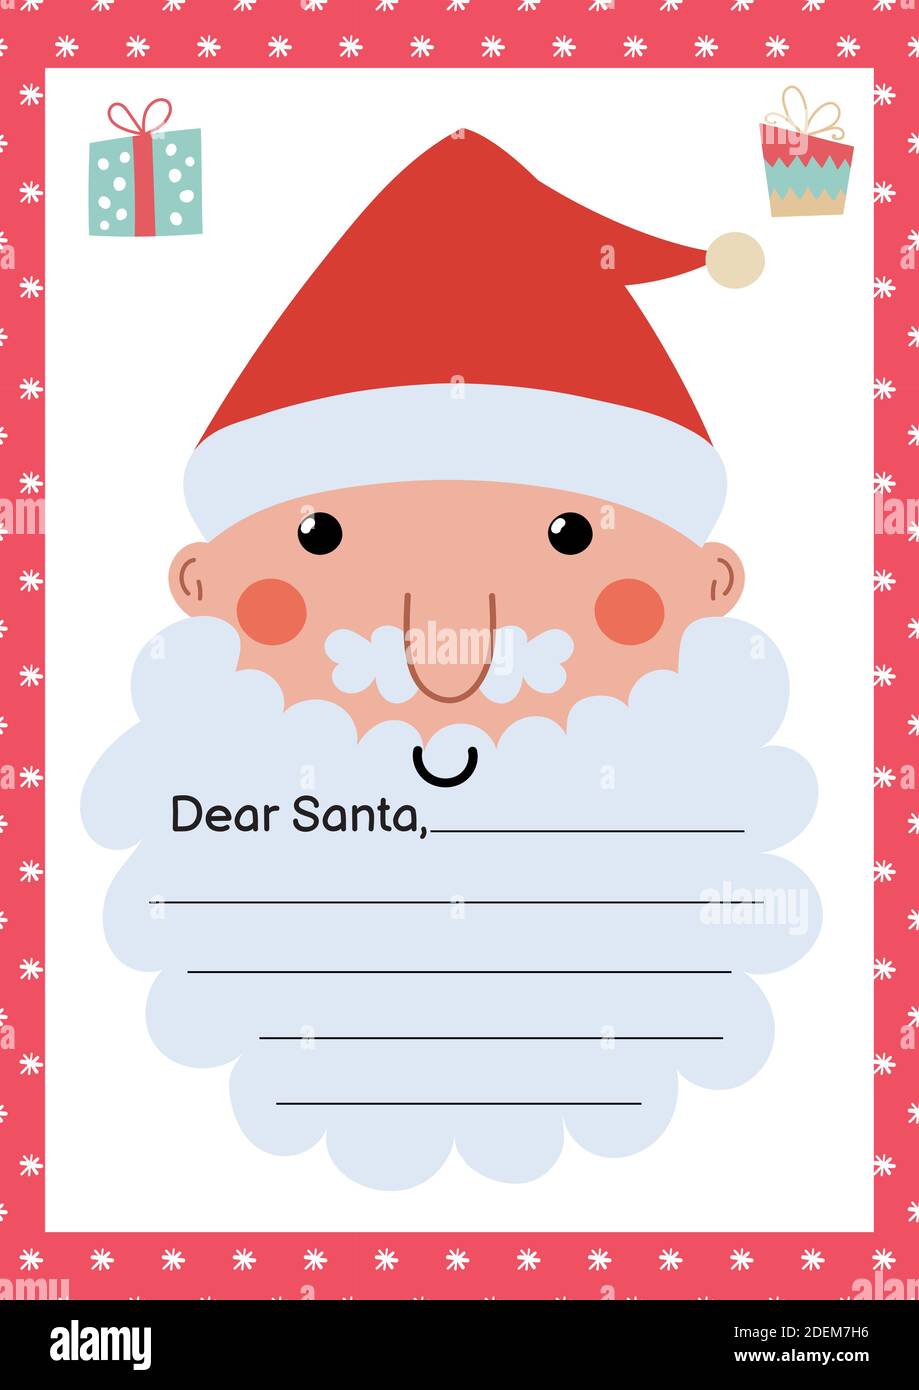 Letter to Santa Claus A21 template with cute Christmas character